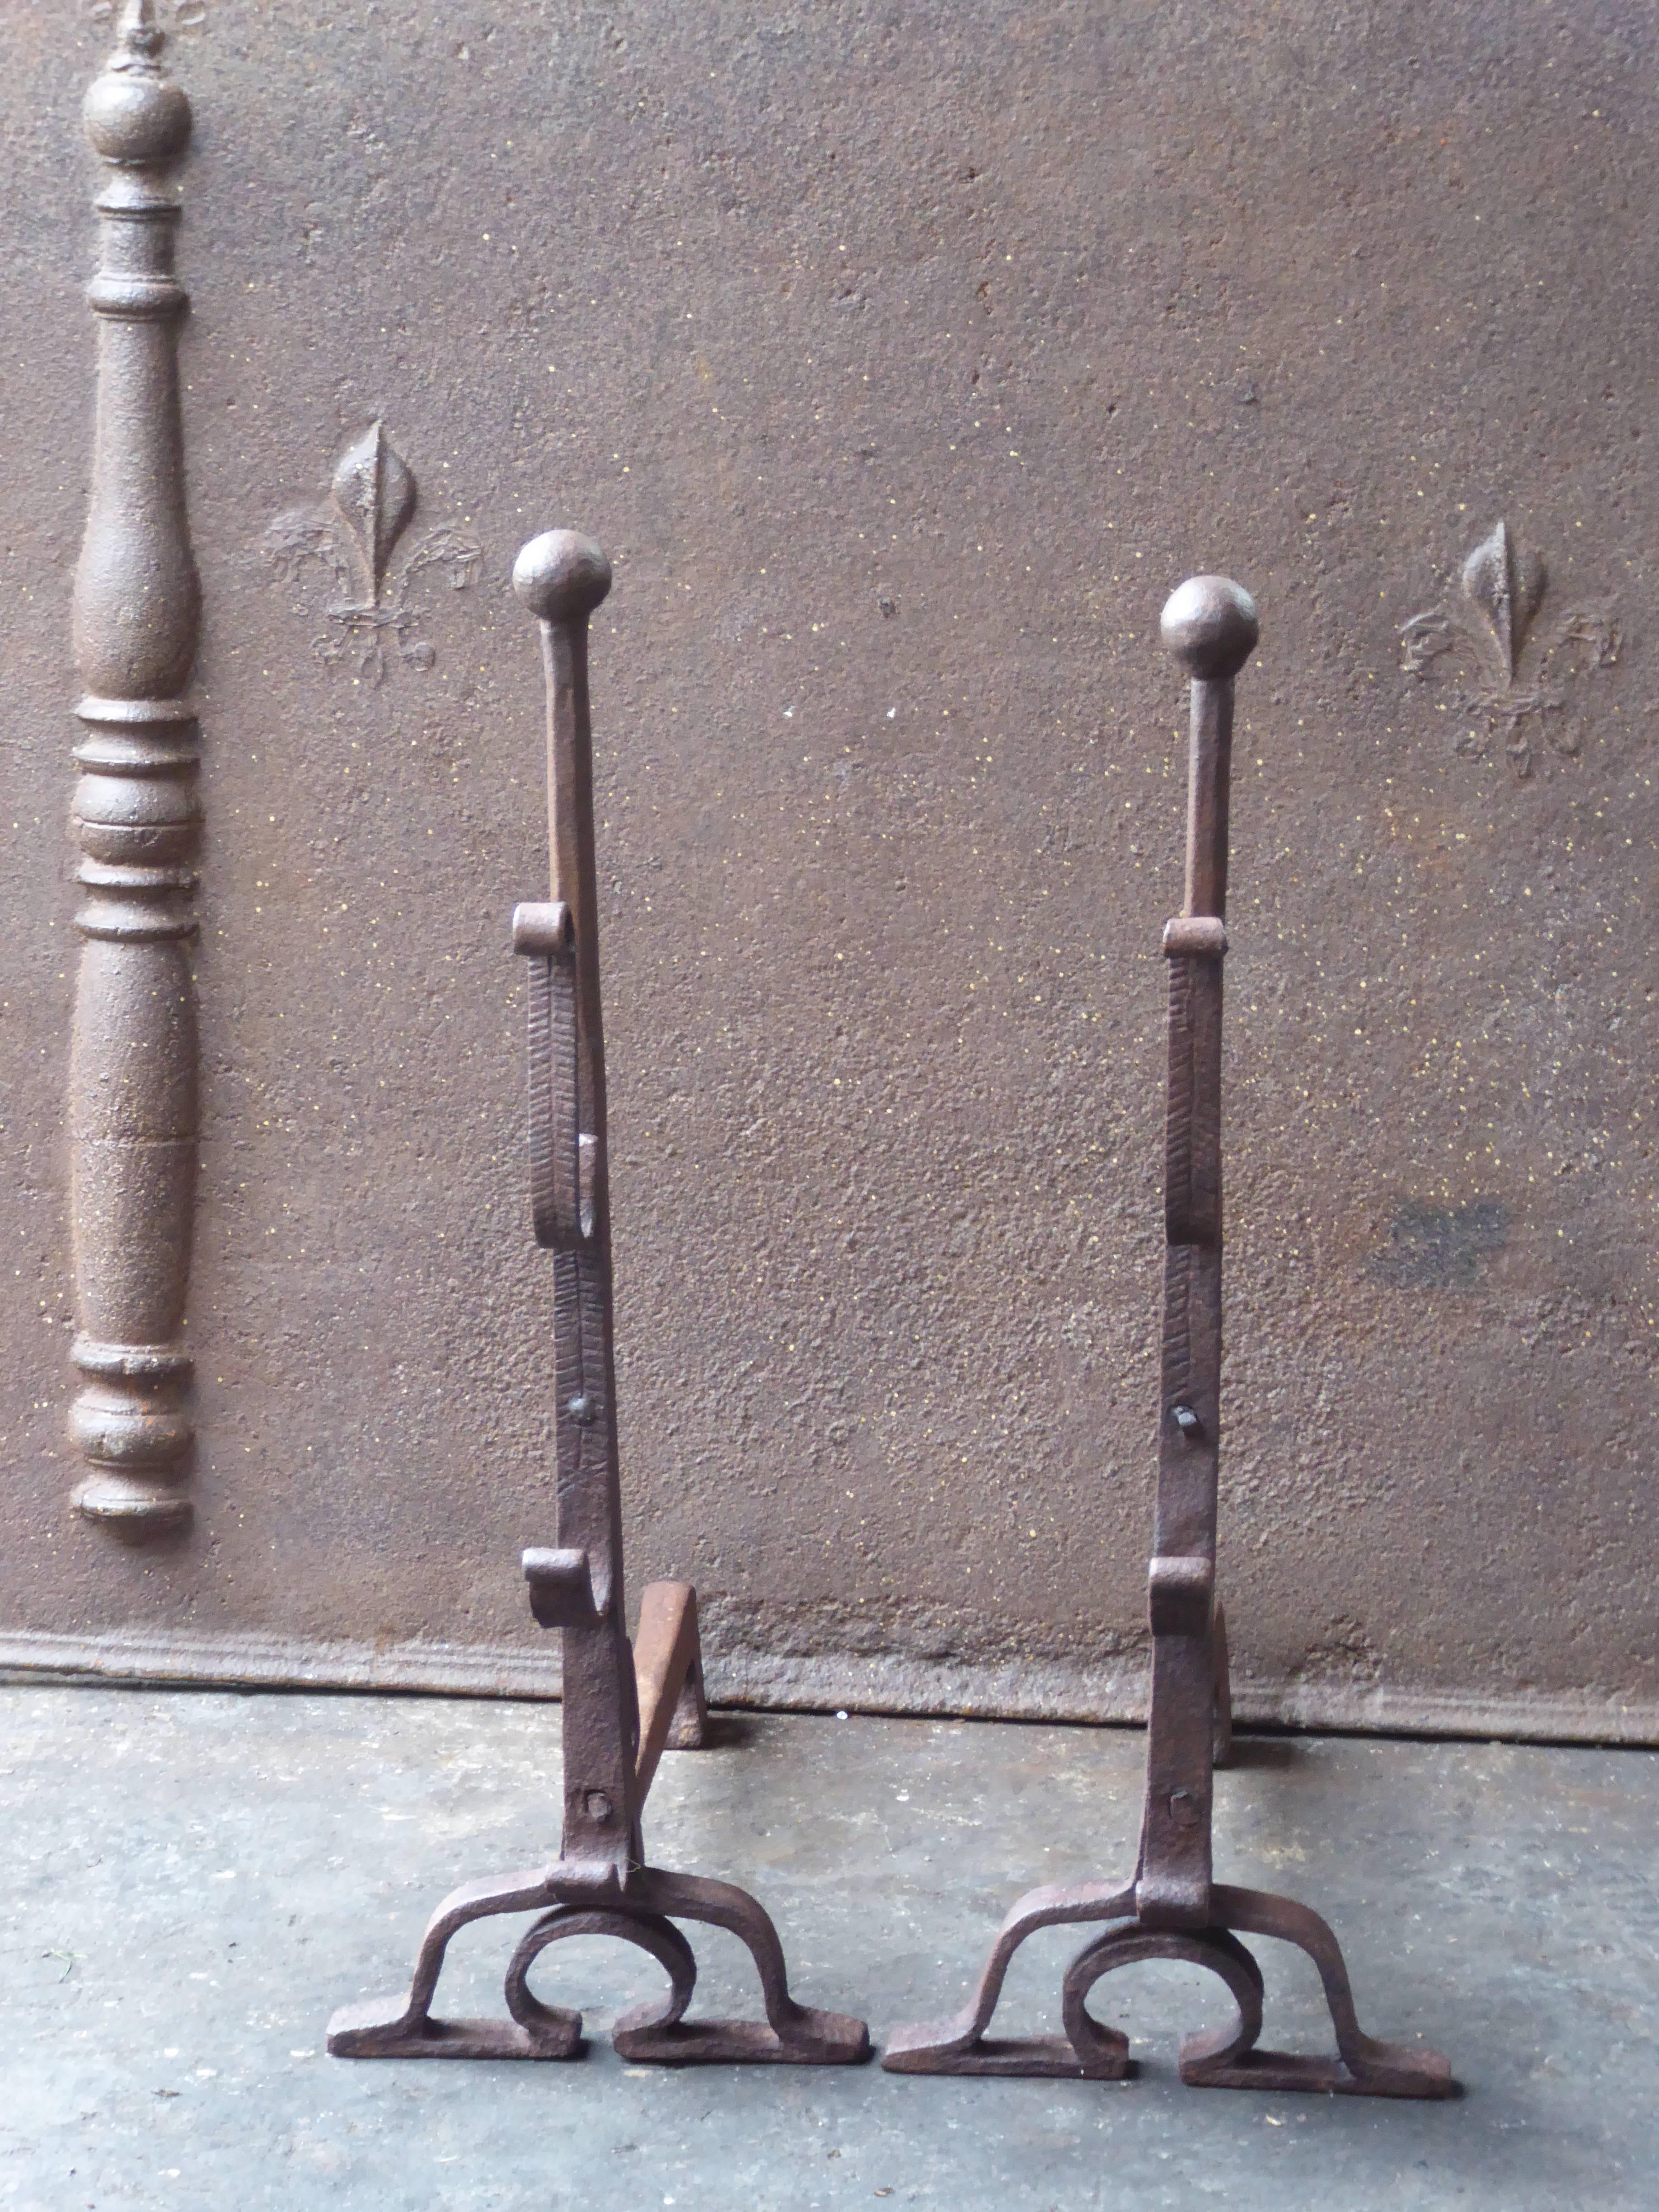 Beautiful 17th century French Louis XIII andirons made of wrought iron.

The condition is good.